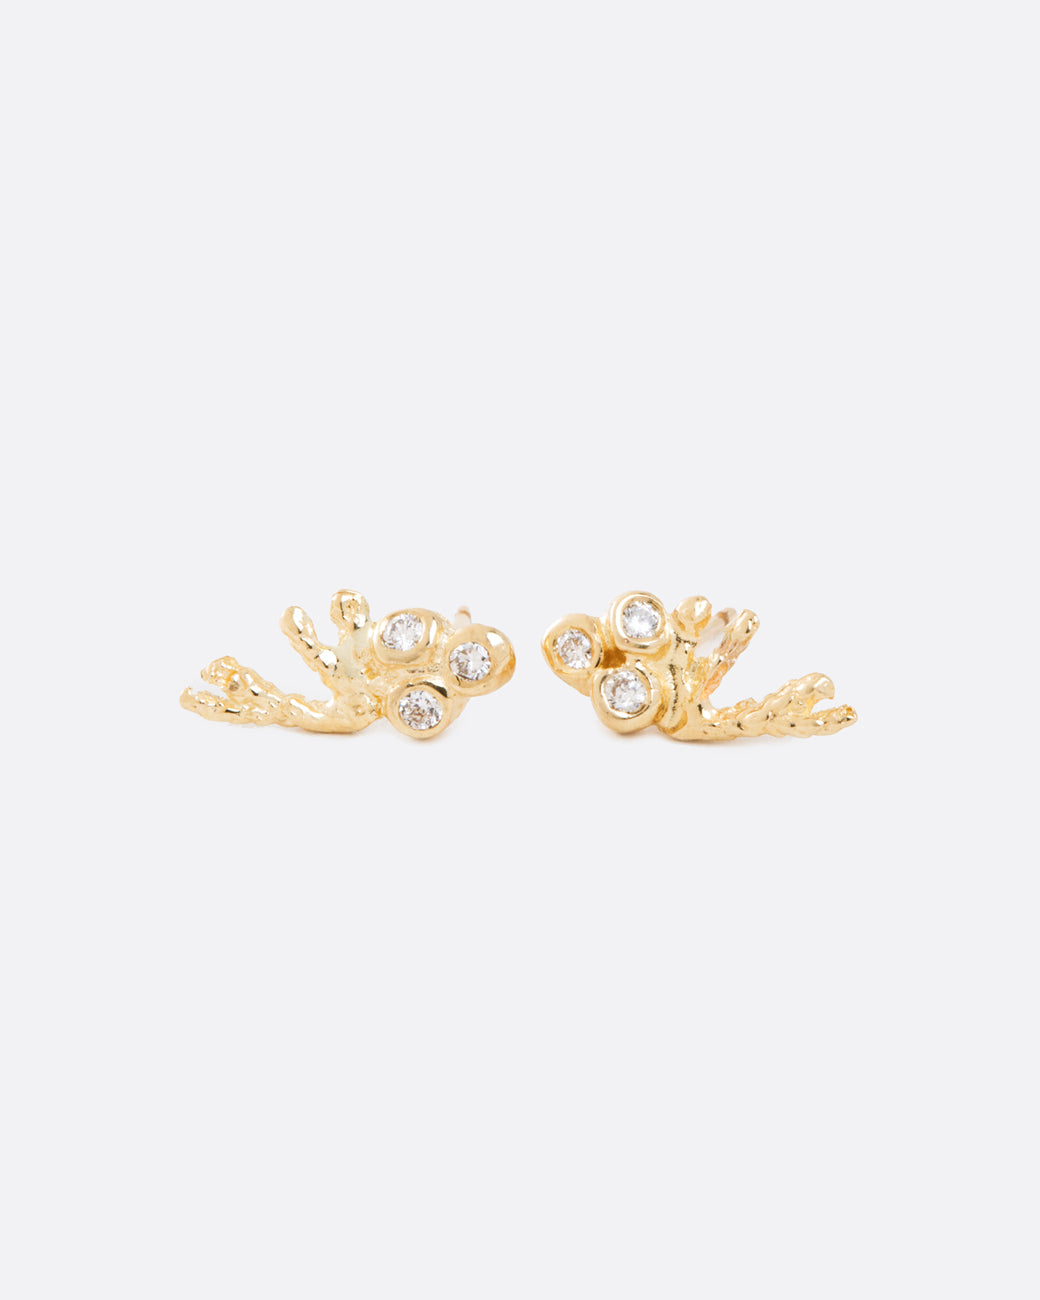 two yellow gold earrings with a trio of diamonds bezel set, and a yellow gold branch extending to the side.